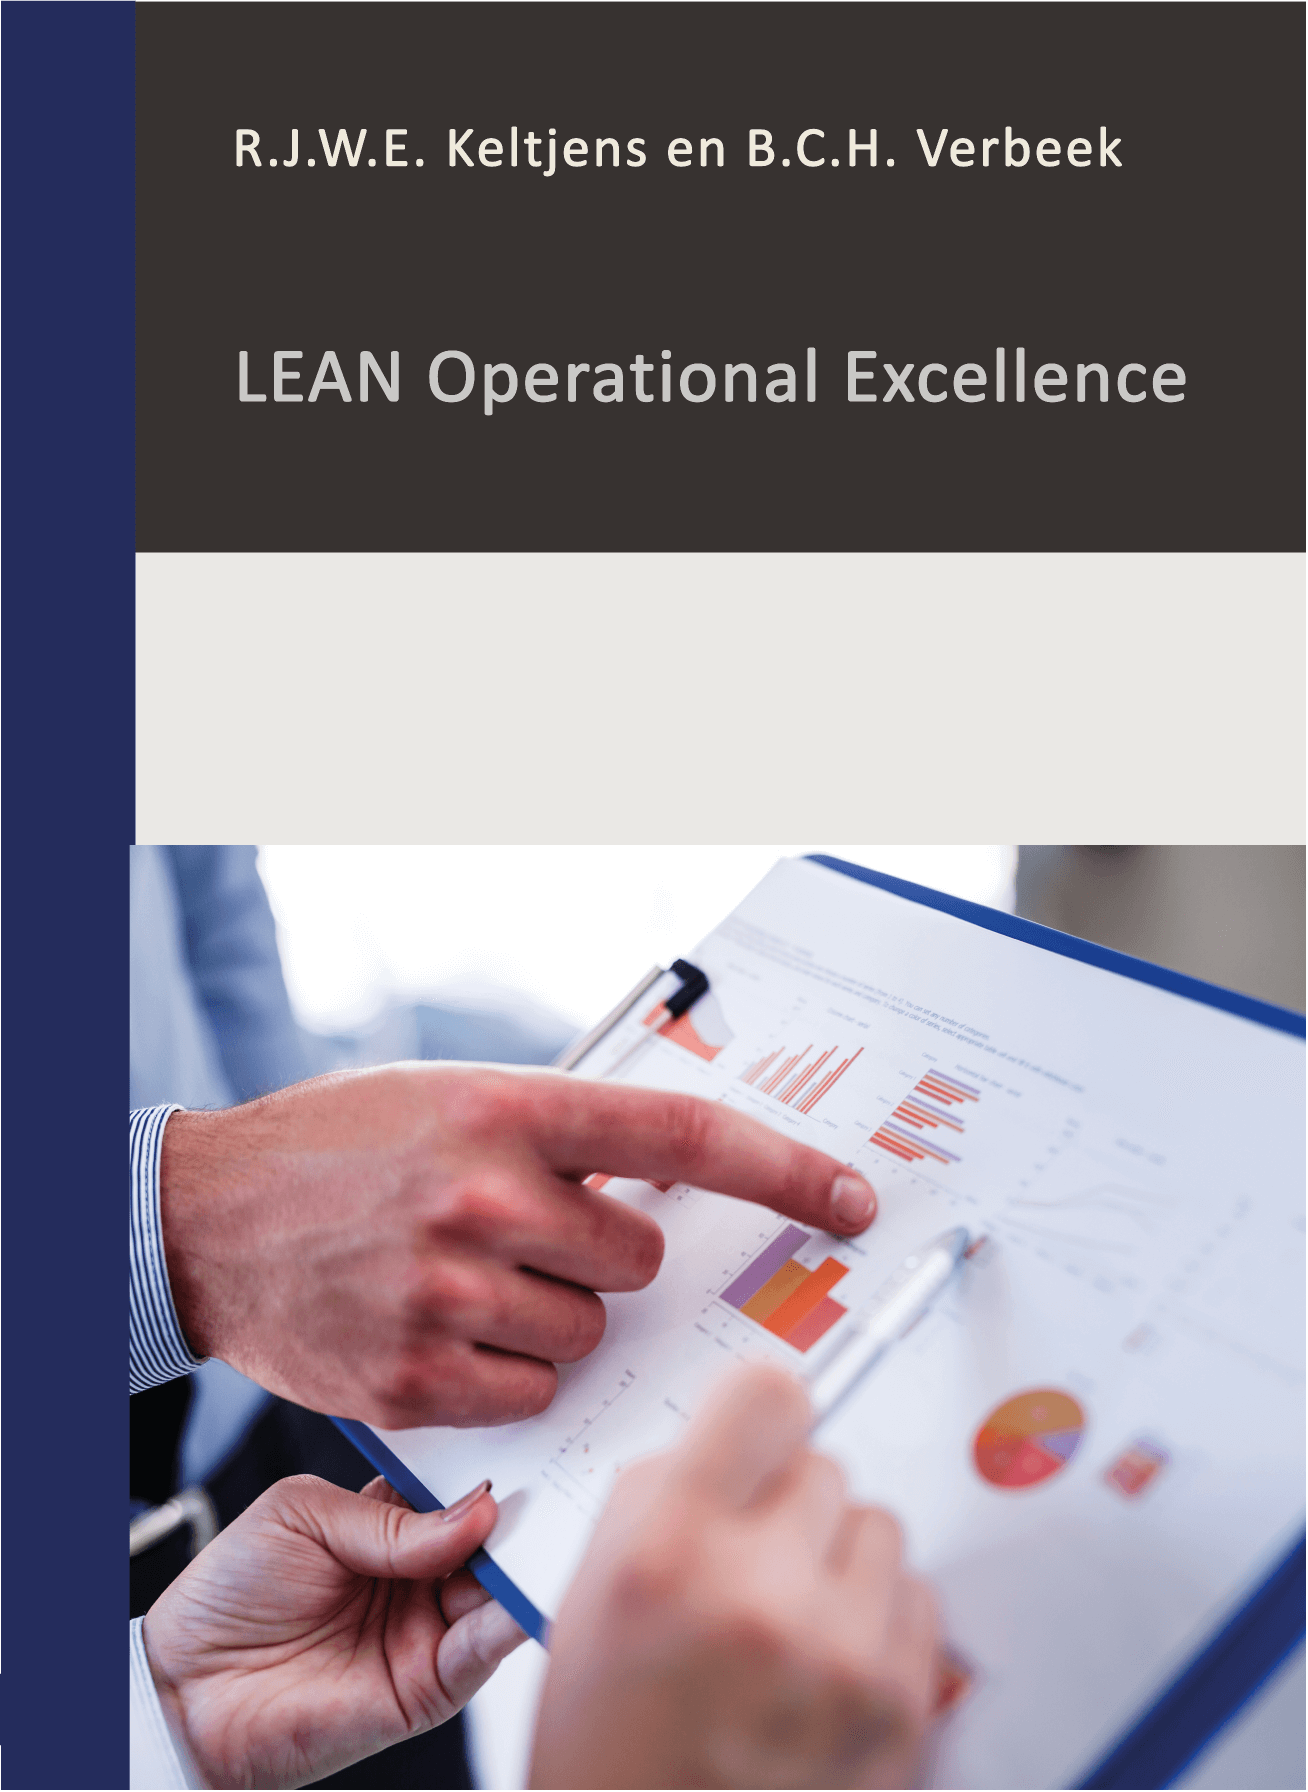 LEAN Operational Excellence